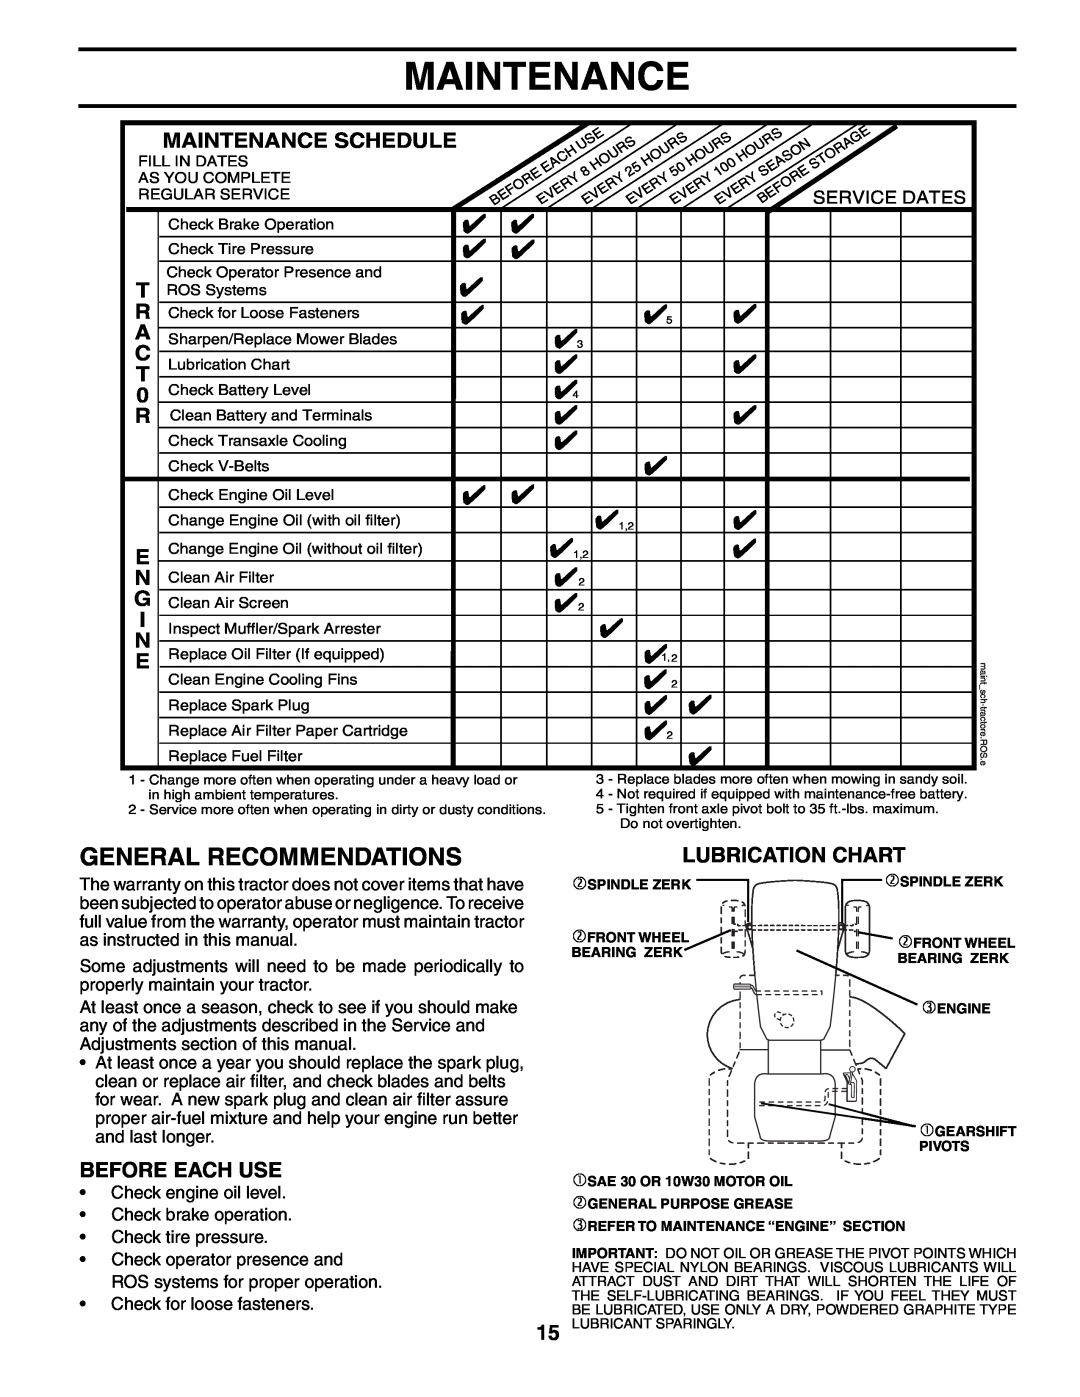 Poulan WE13538LT manual General Recommendations, Before Each Use, Lubrication Chart, Maintenance Schedule 